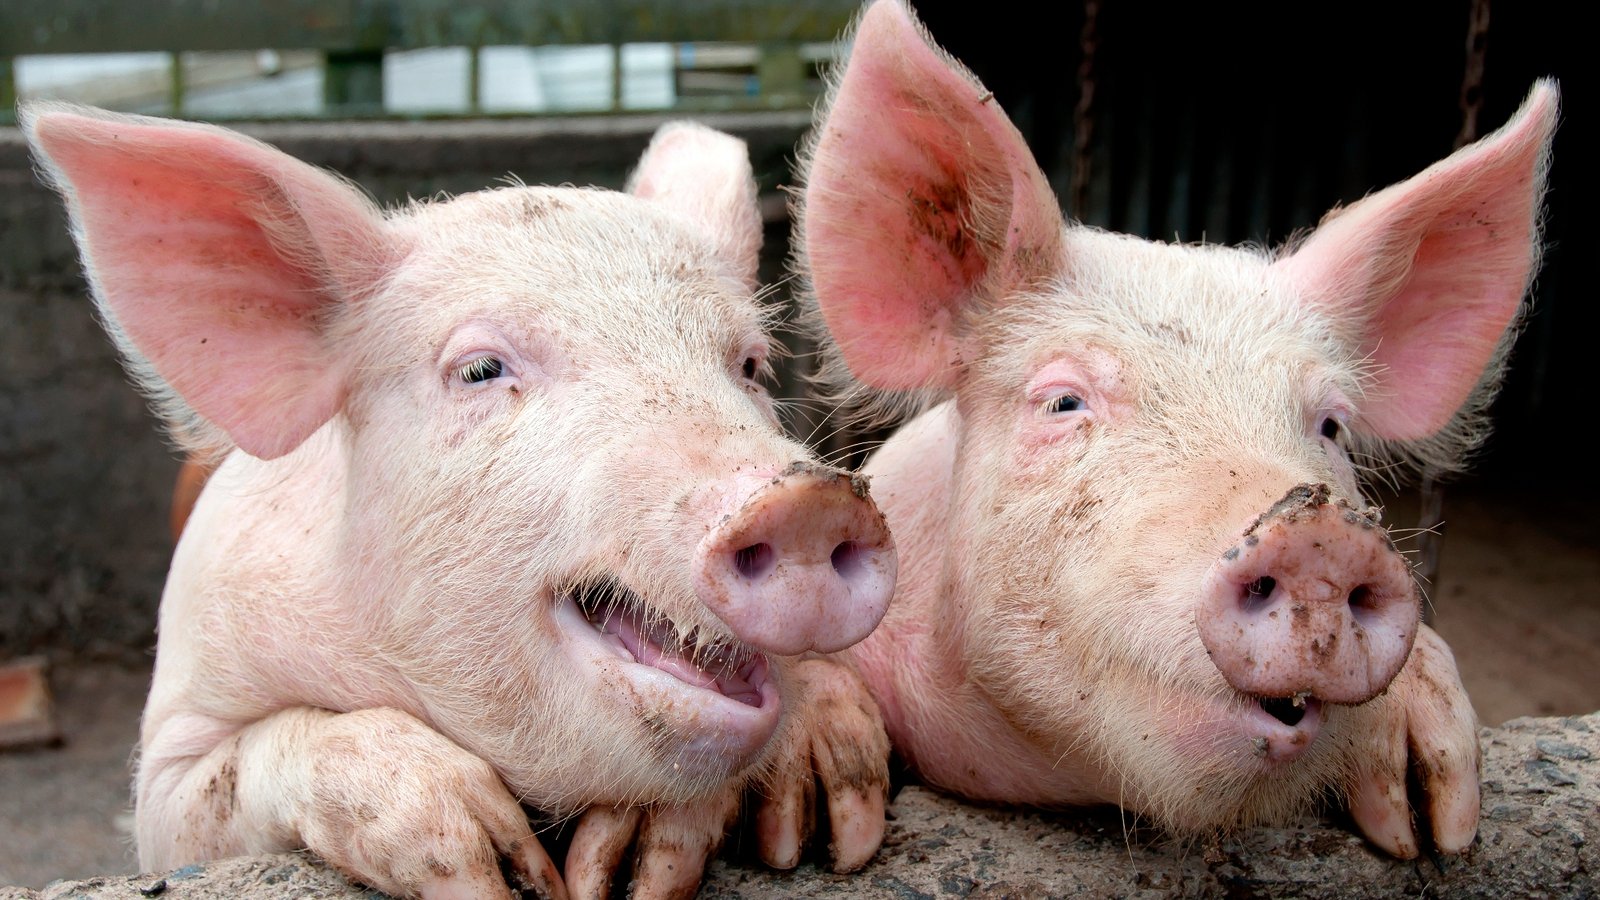 Meet the pigs who can play video games